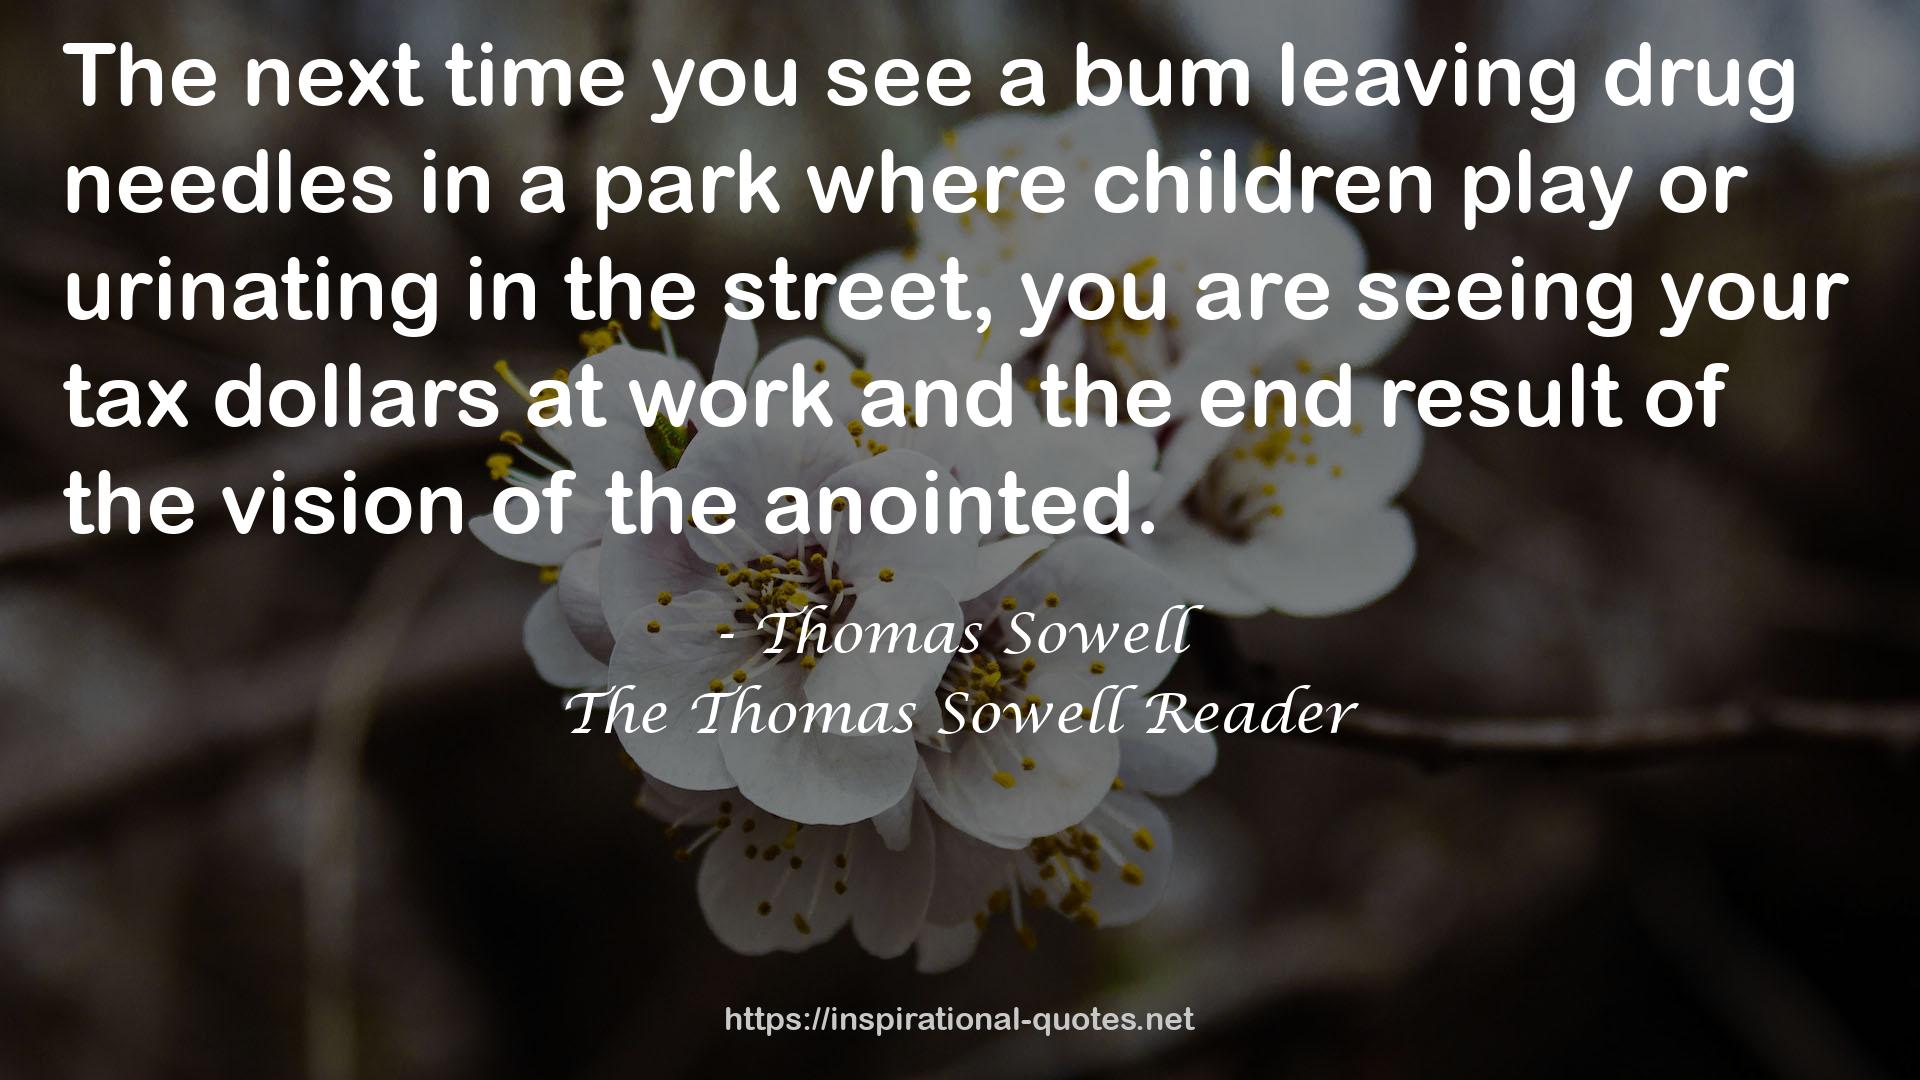 The Thomas Sowell Reader QUOTES